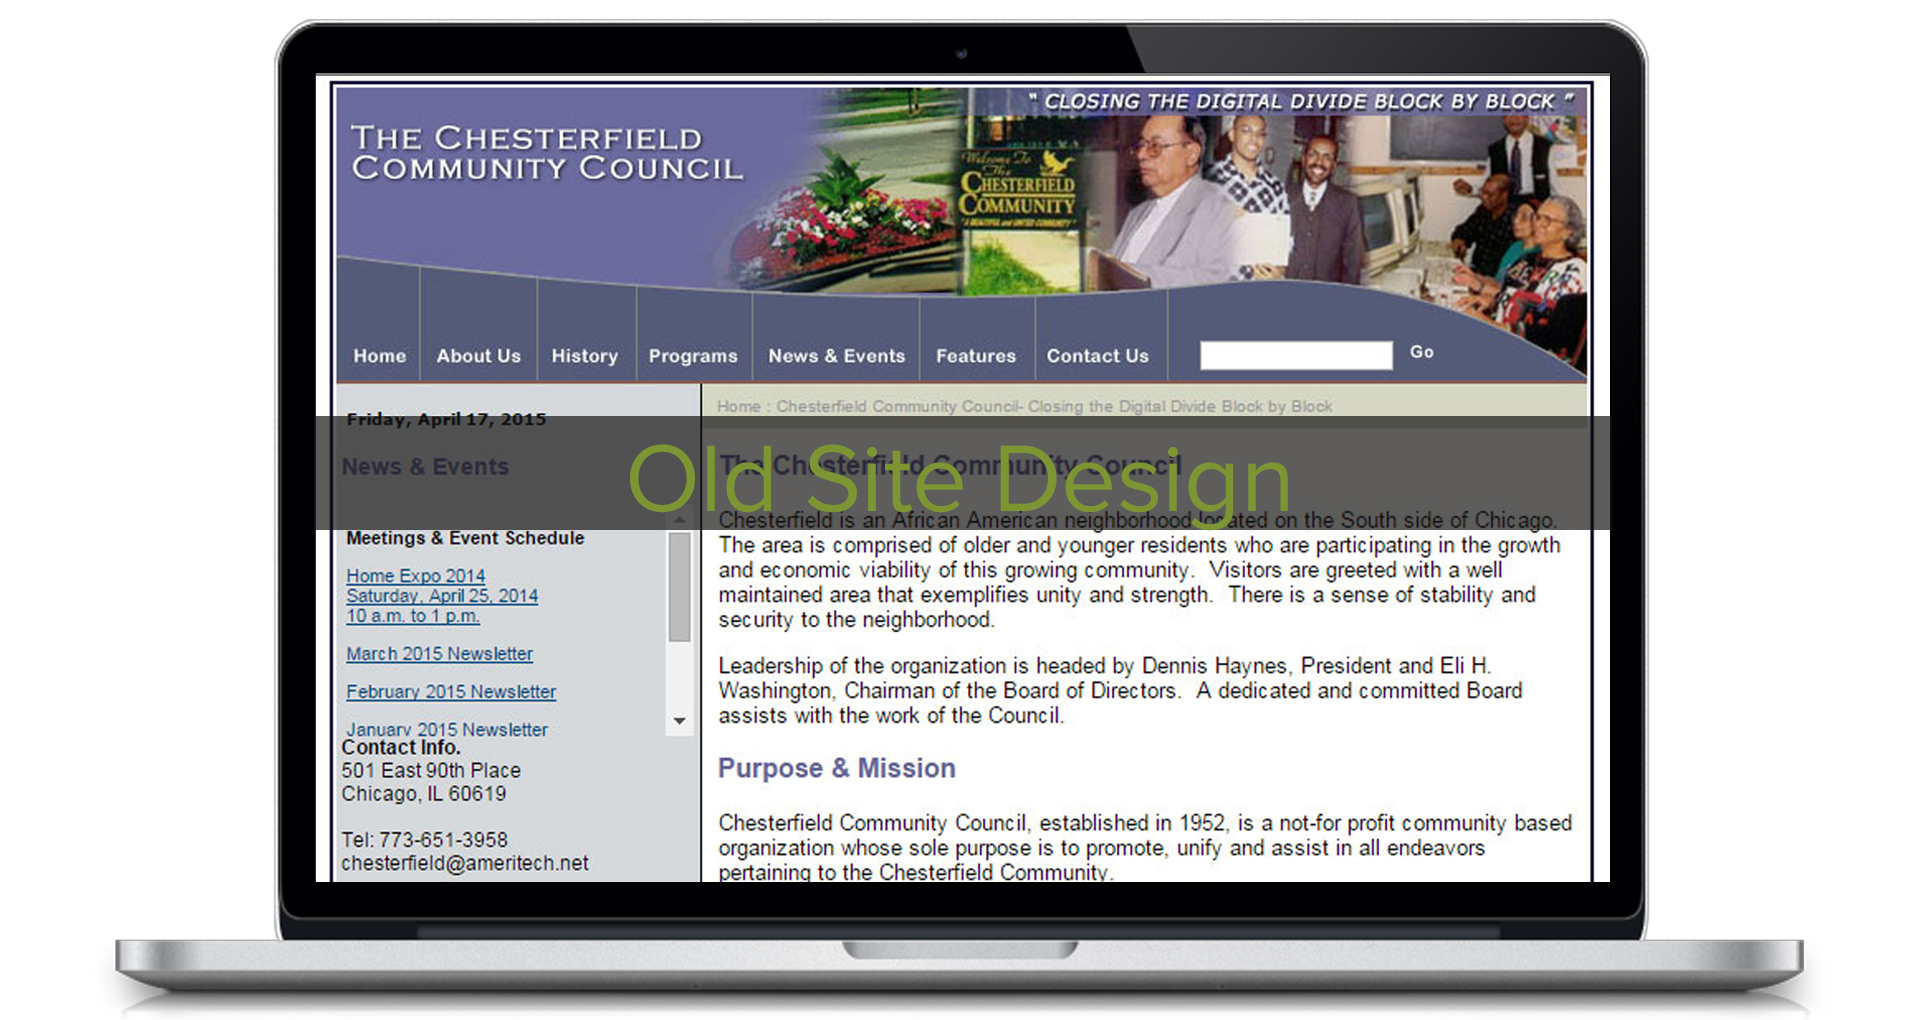 Chesterfield Community Council Project